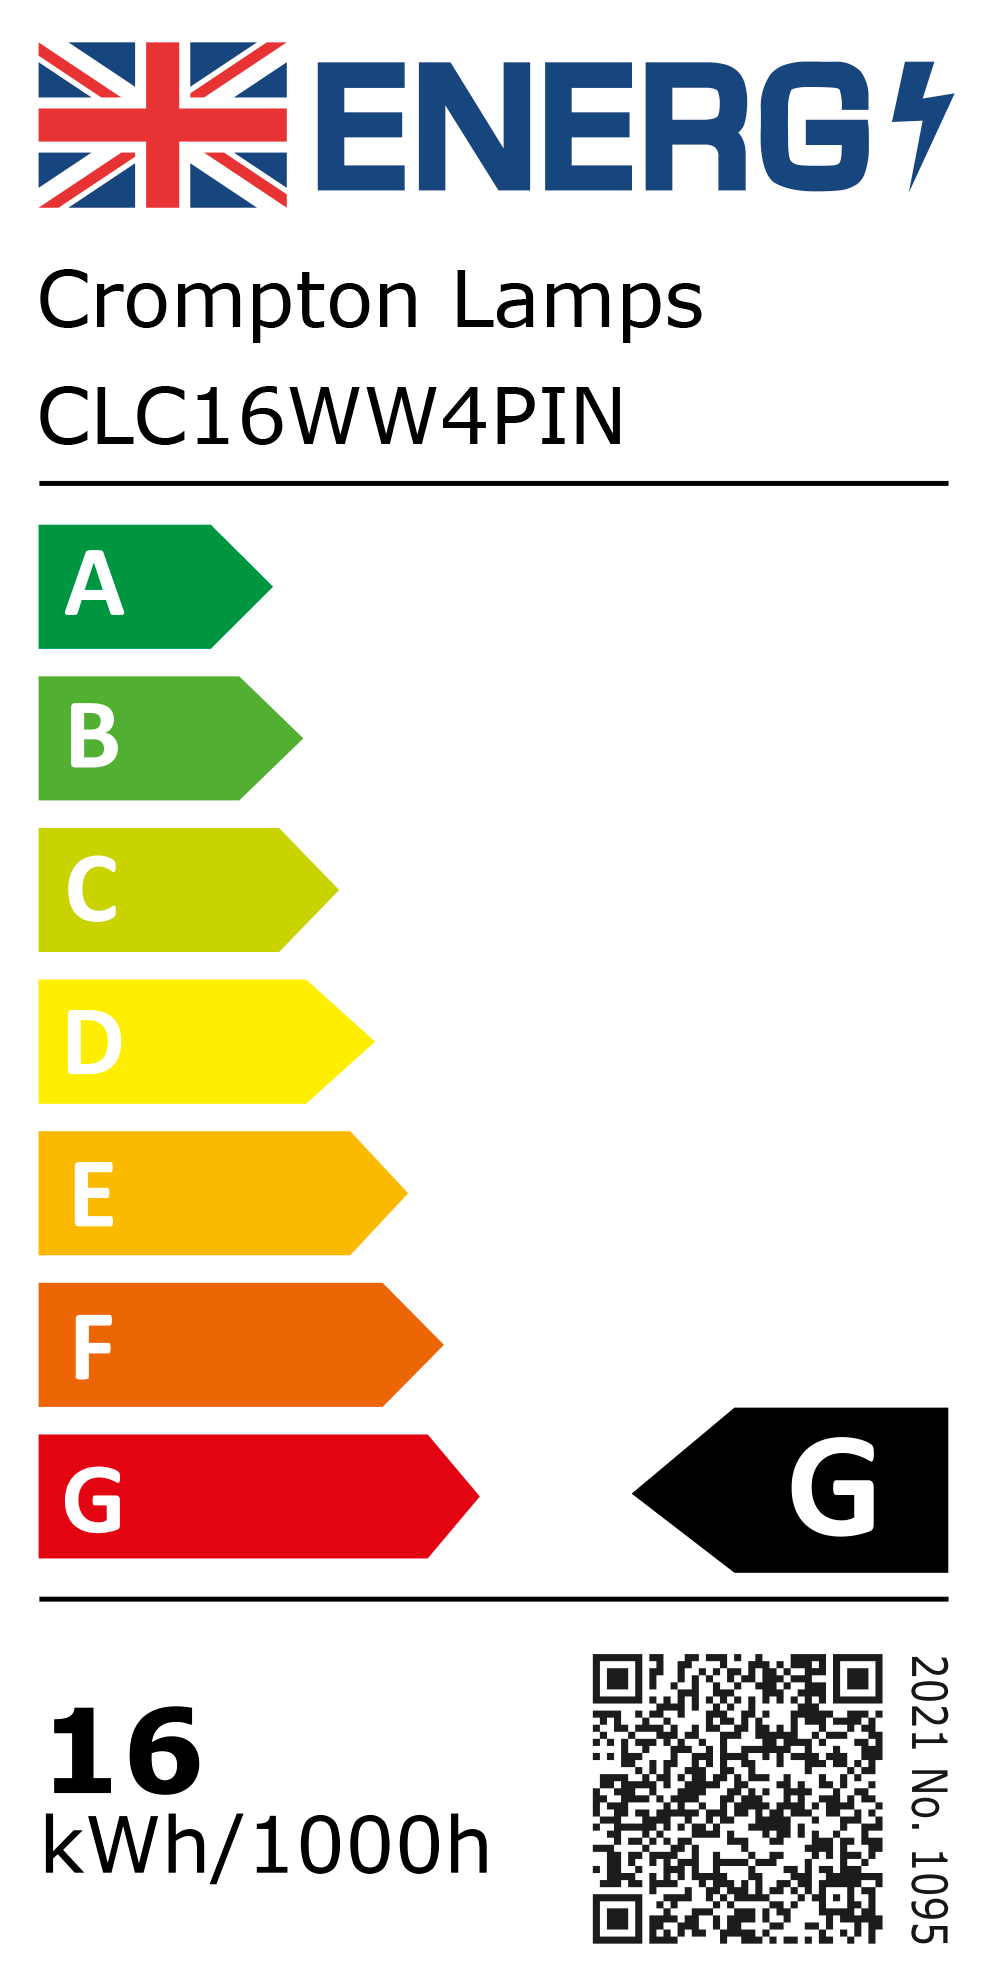 New 2021 Energy Rating Label: Stock Code CLC16WW4PIN